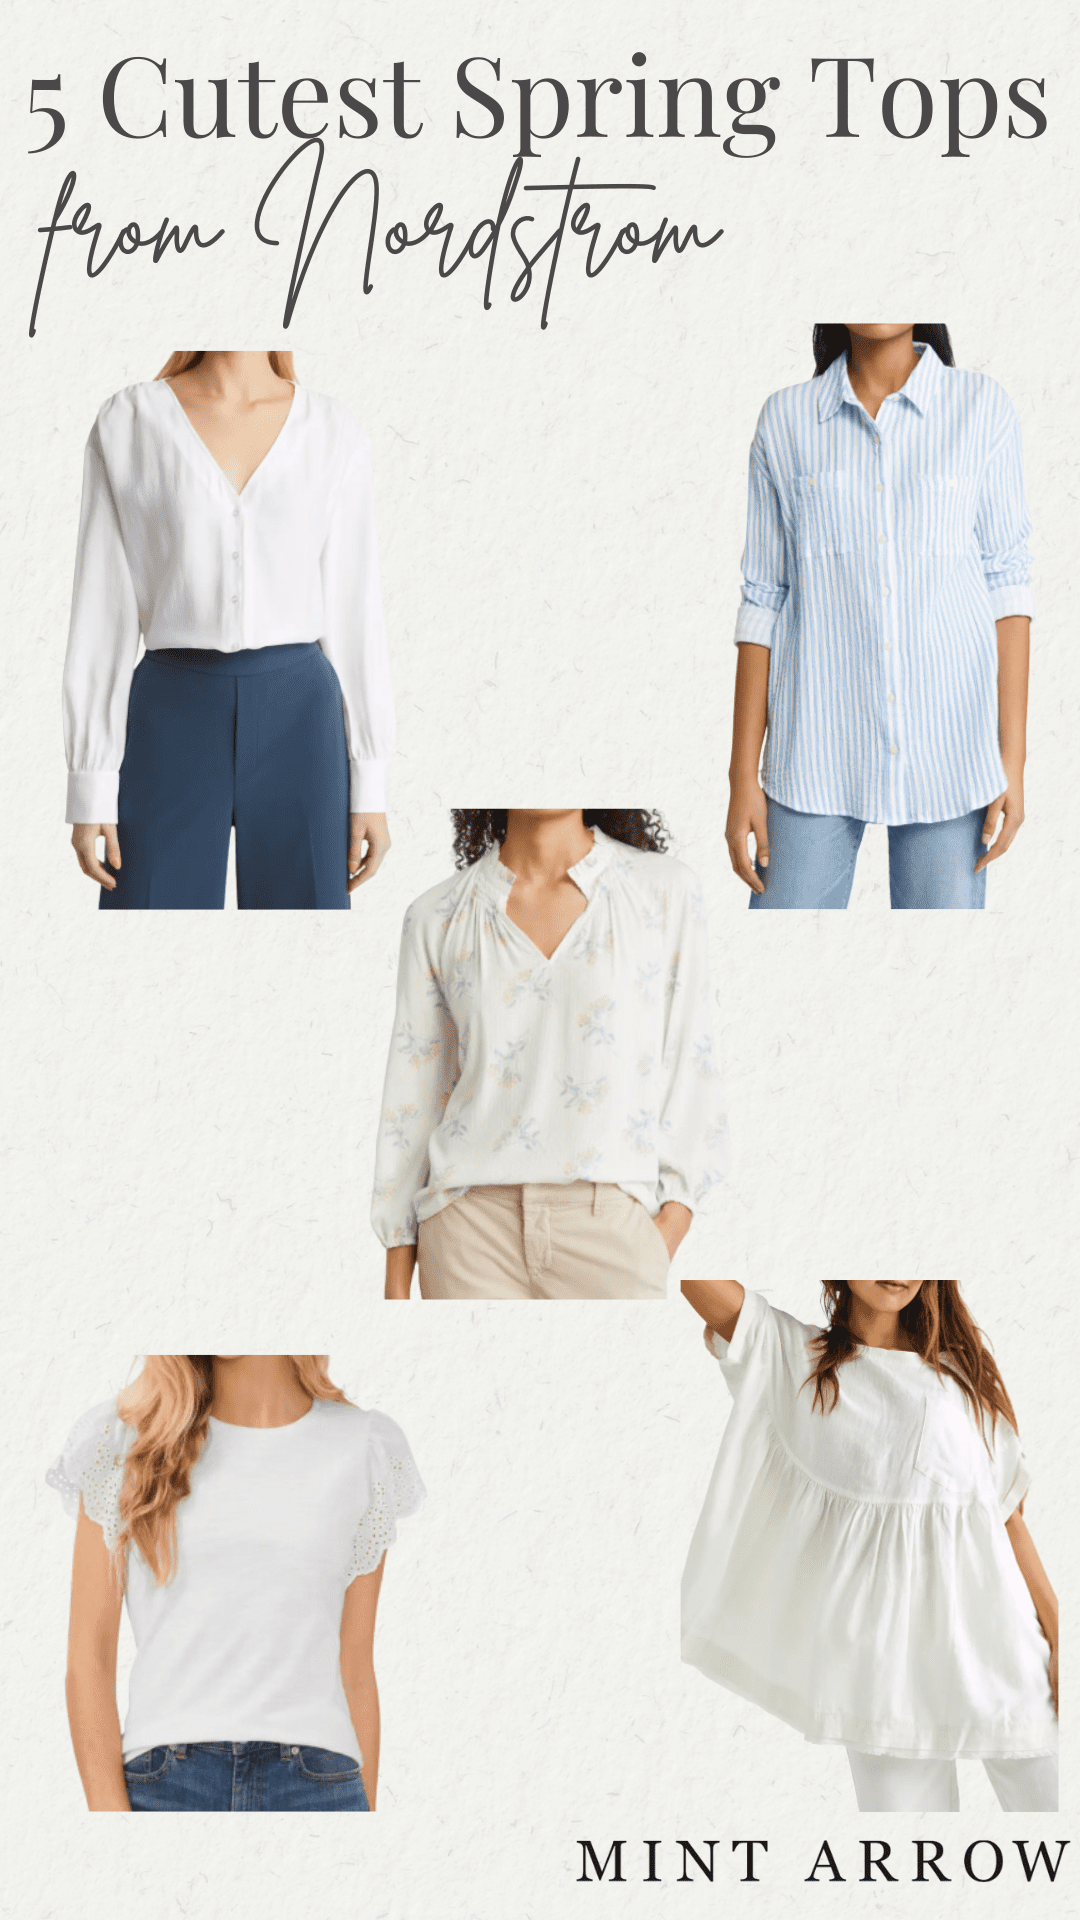 womens spring tops from Nordstrom